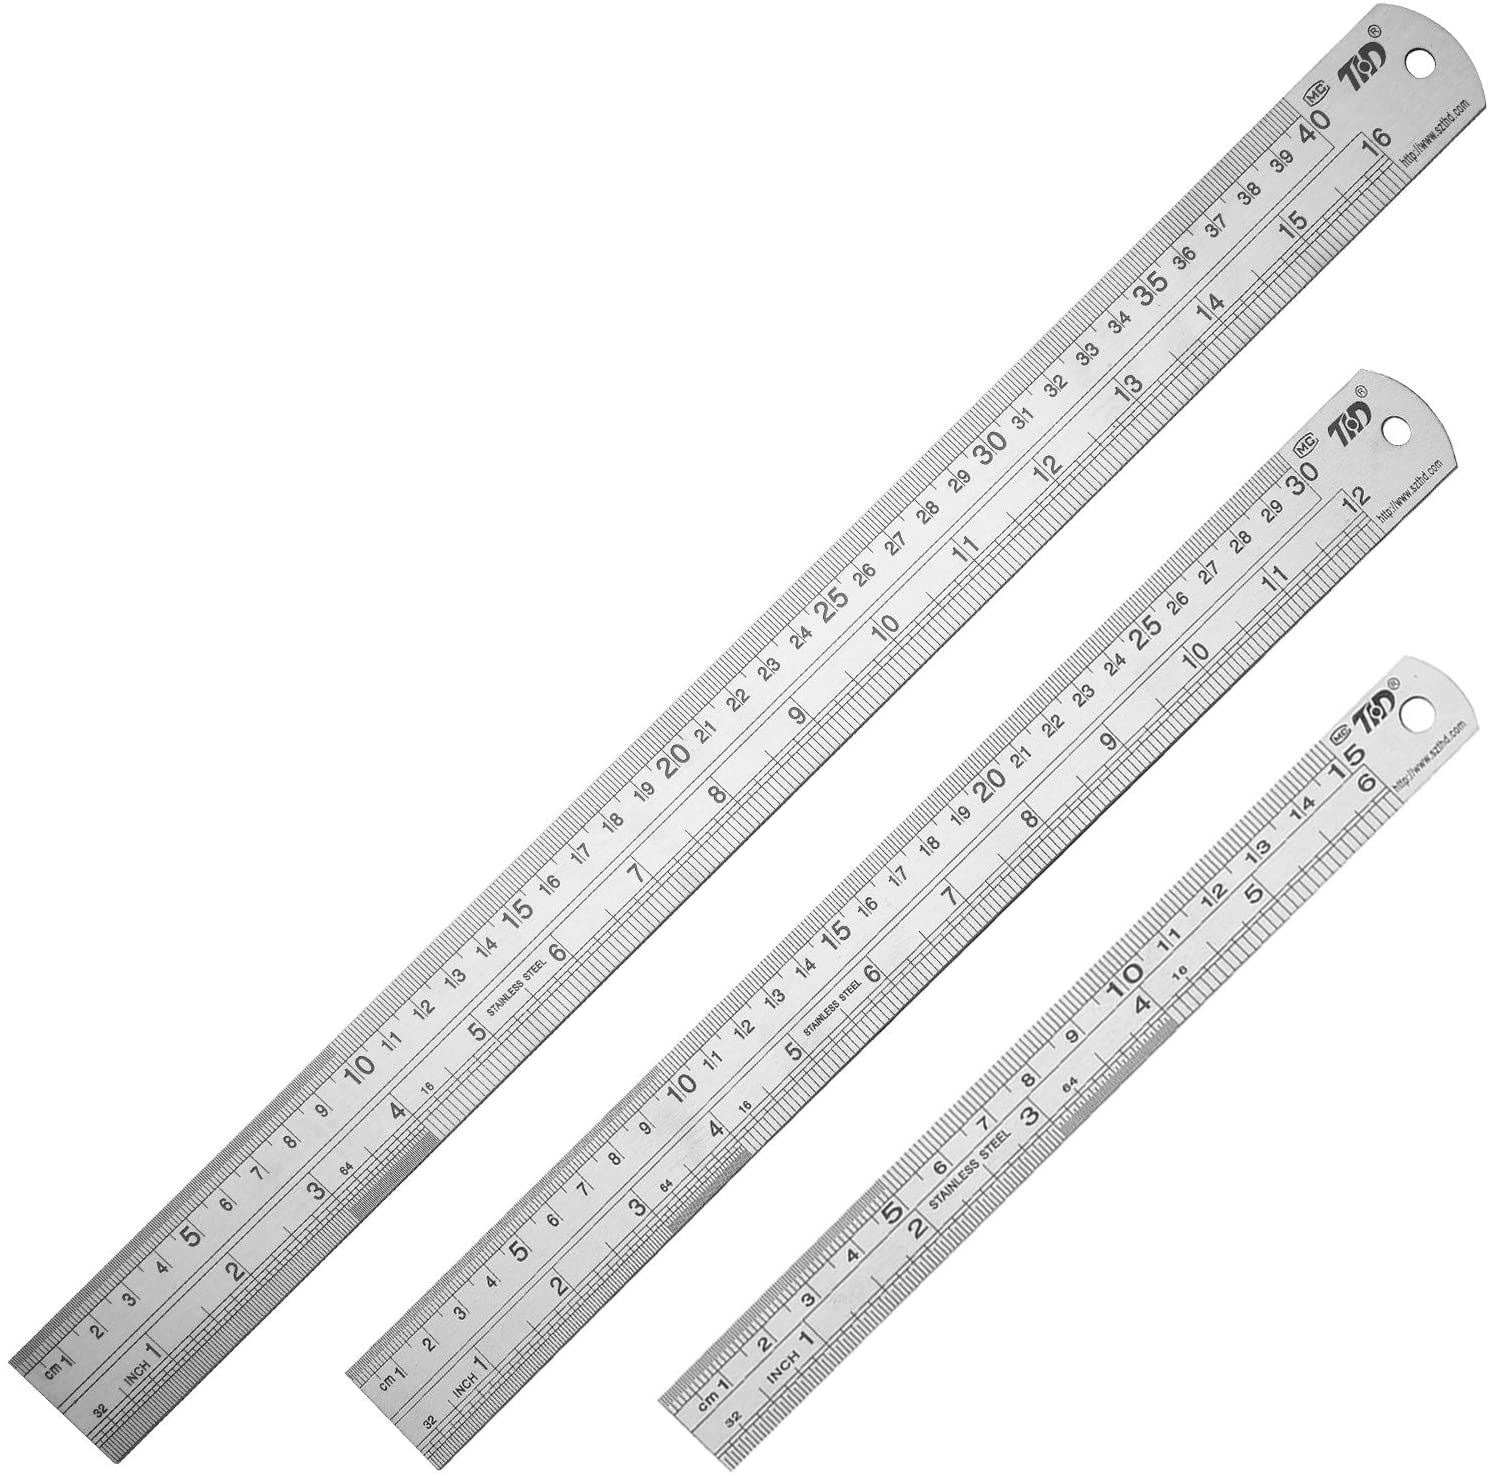 Detail 27 Inches Ruler Nomer 8